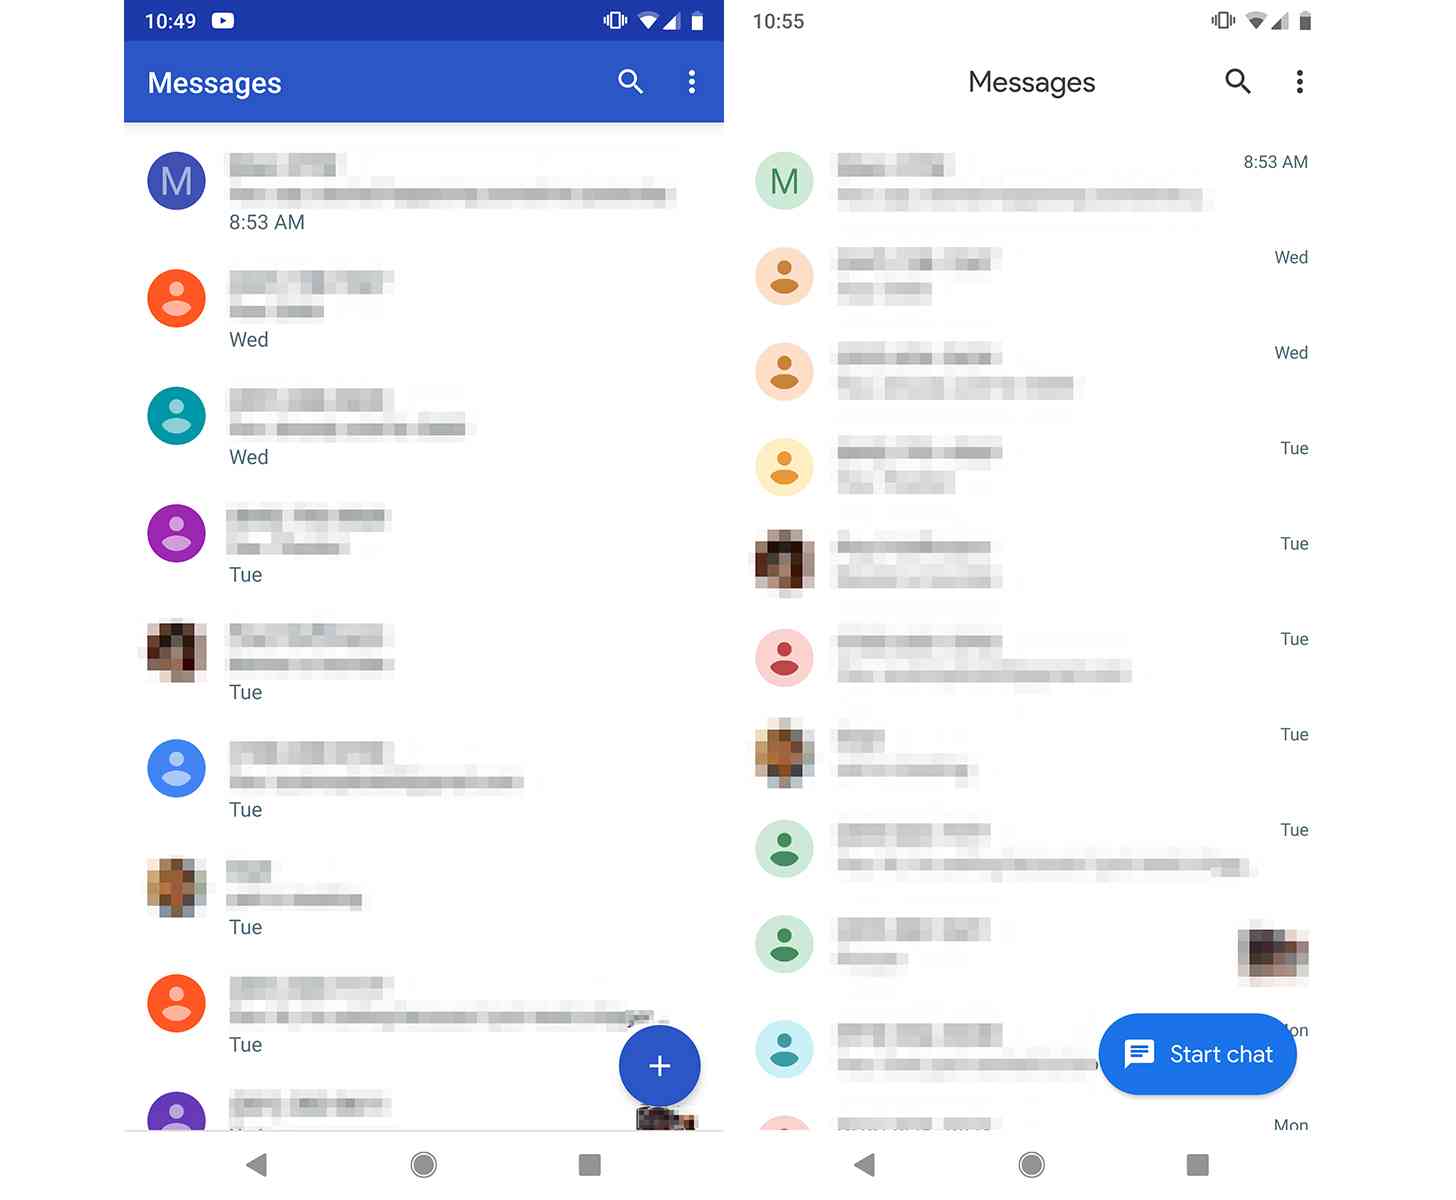 Android Messages 3.5 Material update